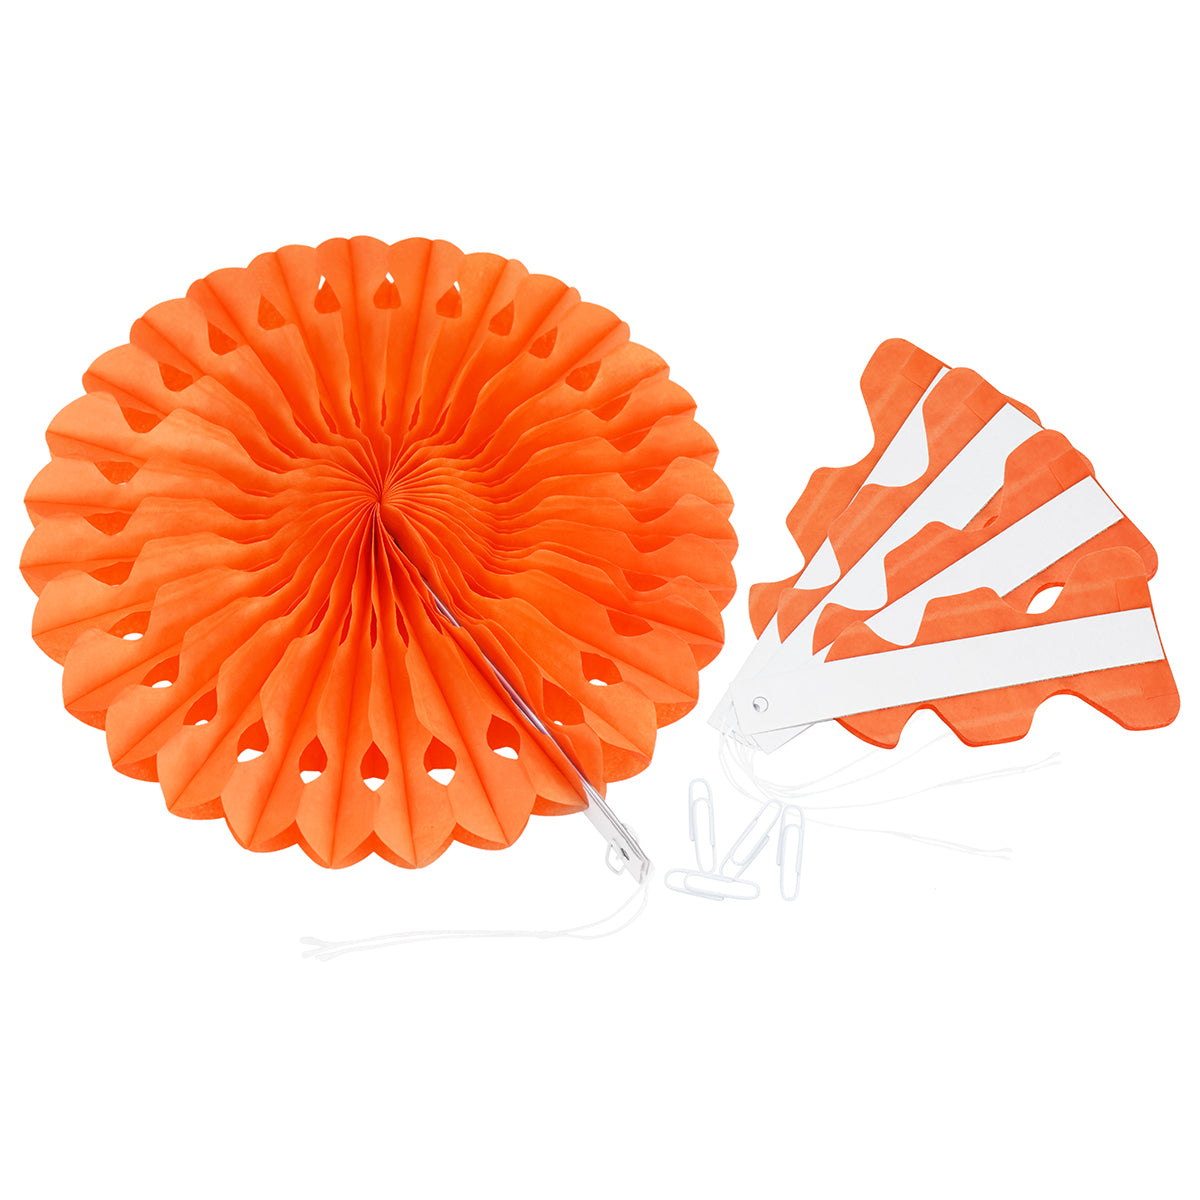 An unfolded orange paper rosette with four folded ones on the right side. The unfolded one looks like a fan shape.